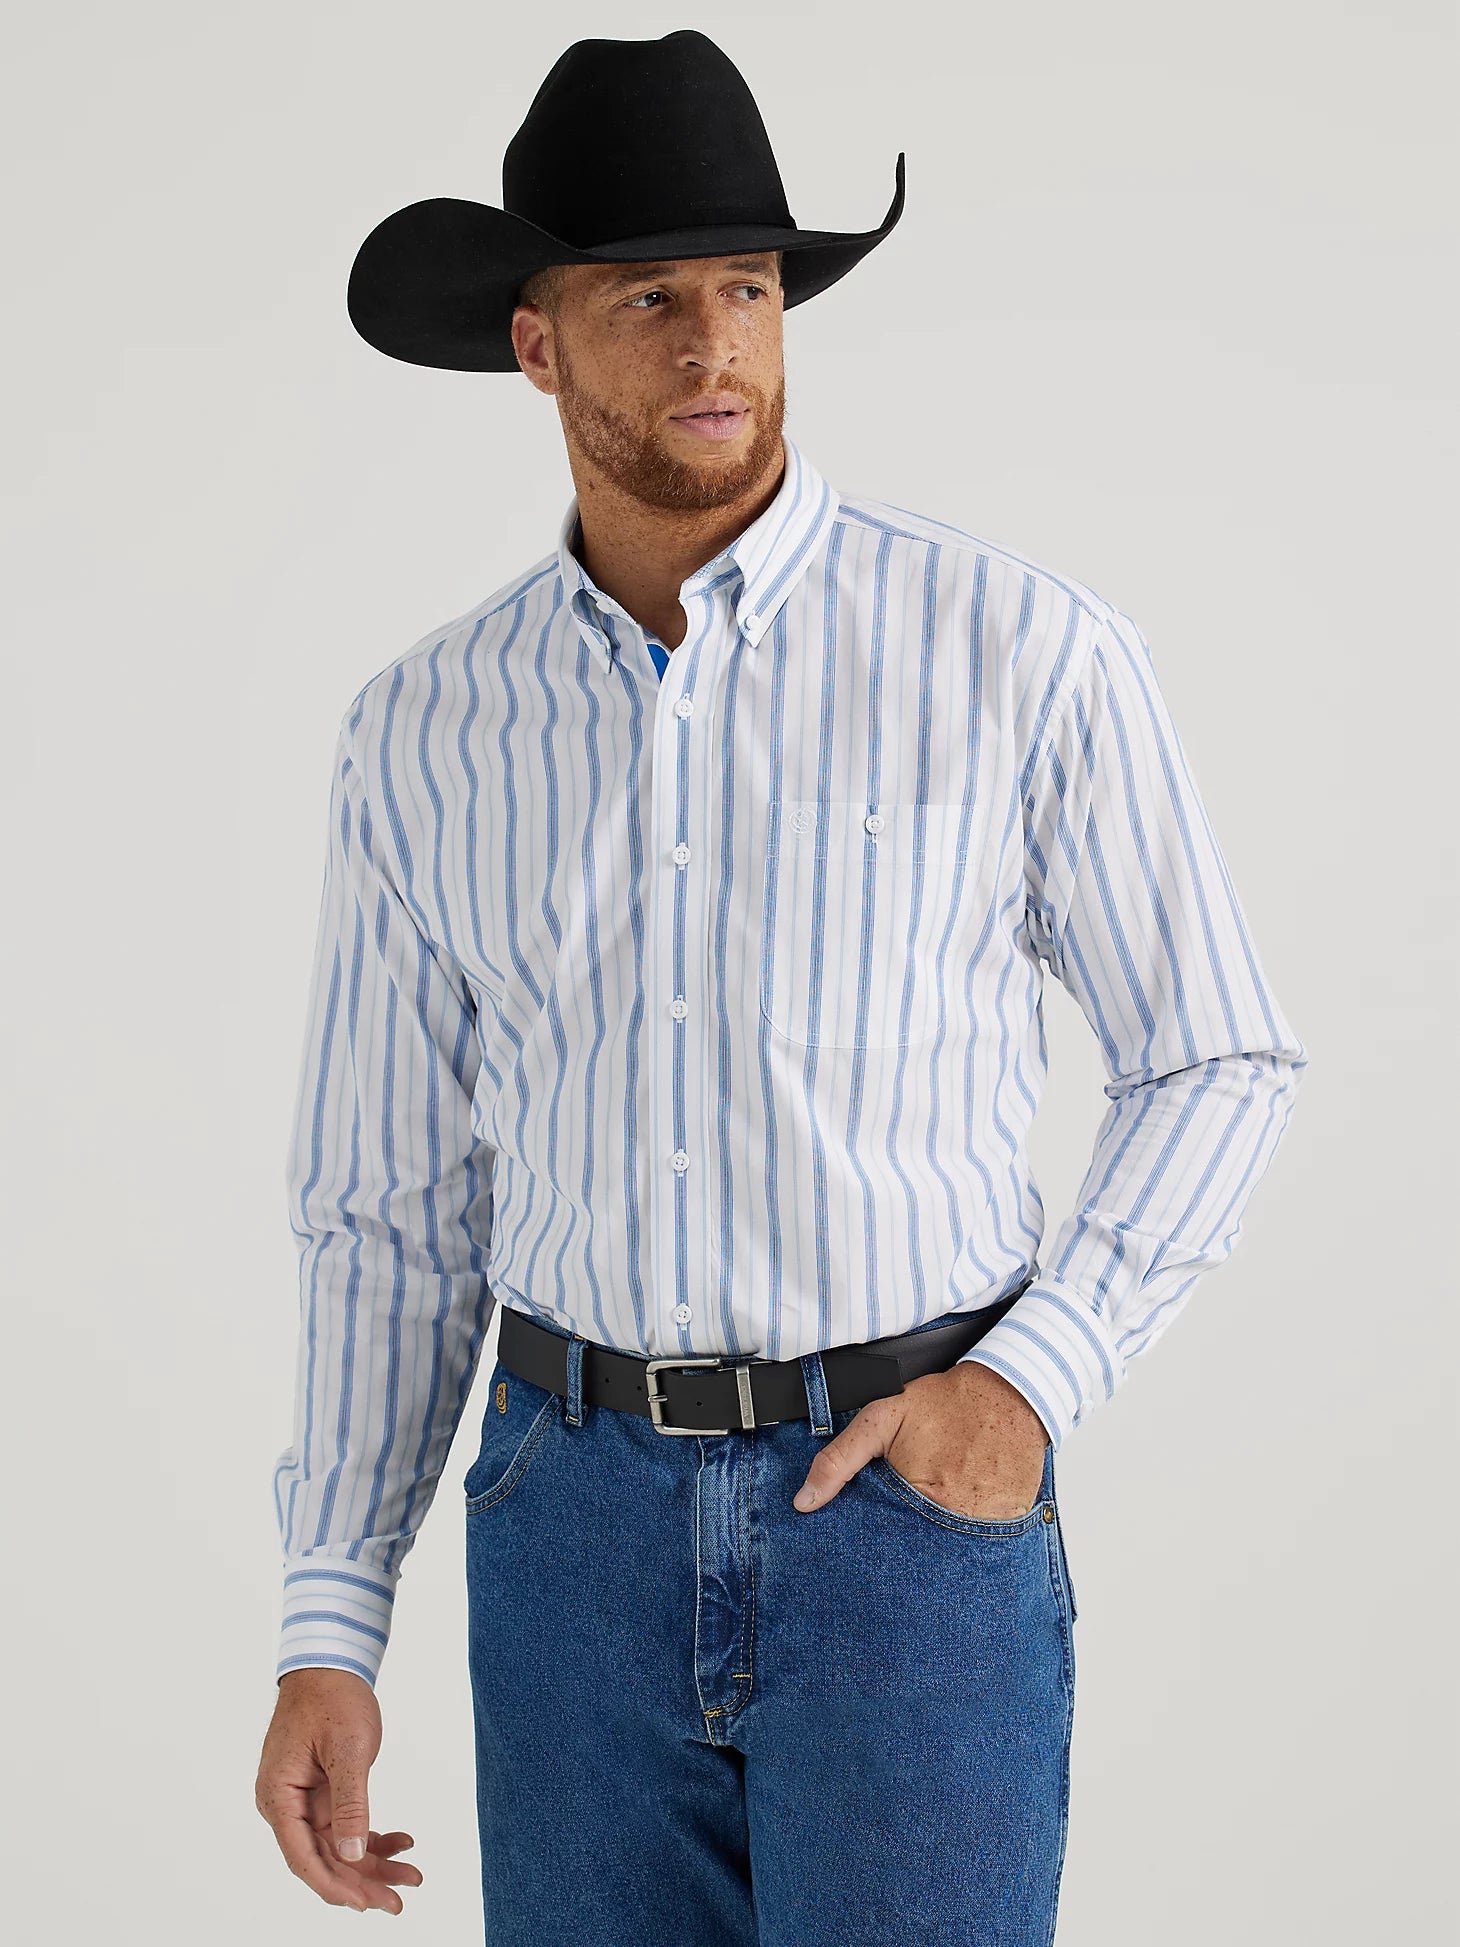 Wrangler George Strait Collection Men's Long Sleeve Shirt STYLE 112344872